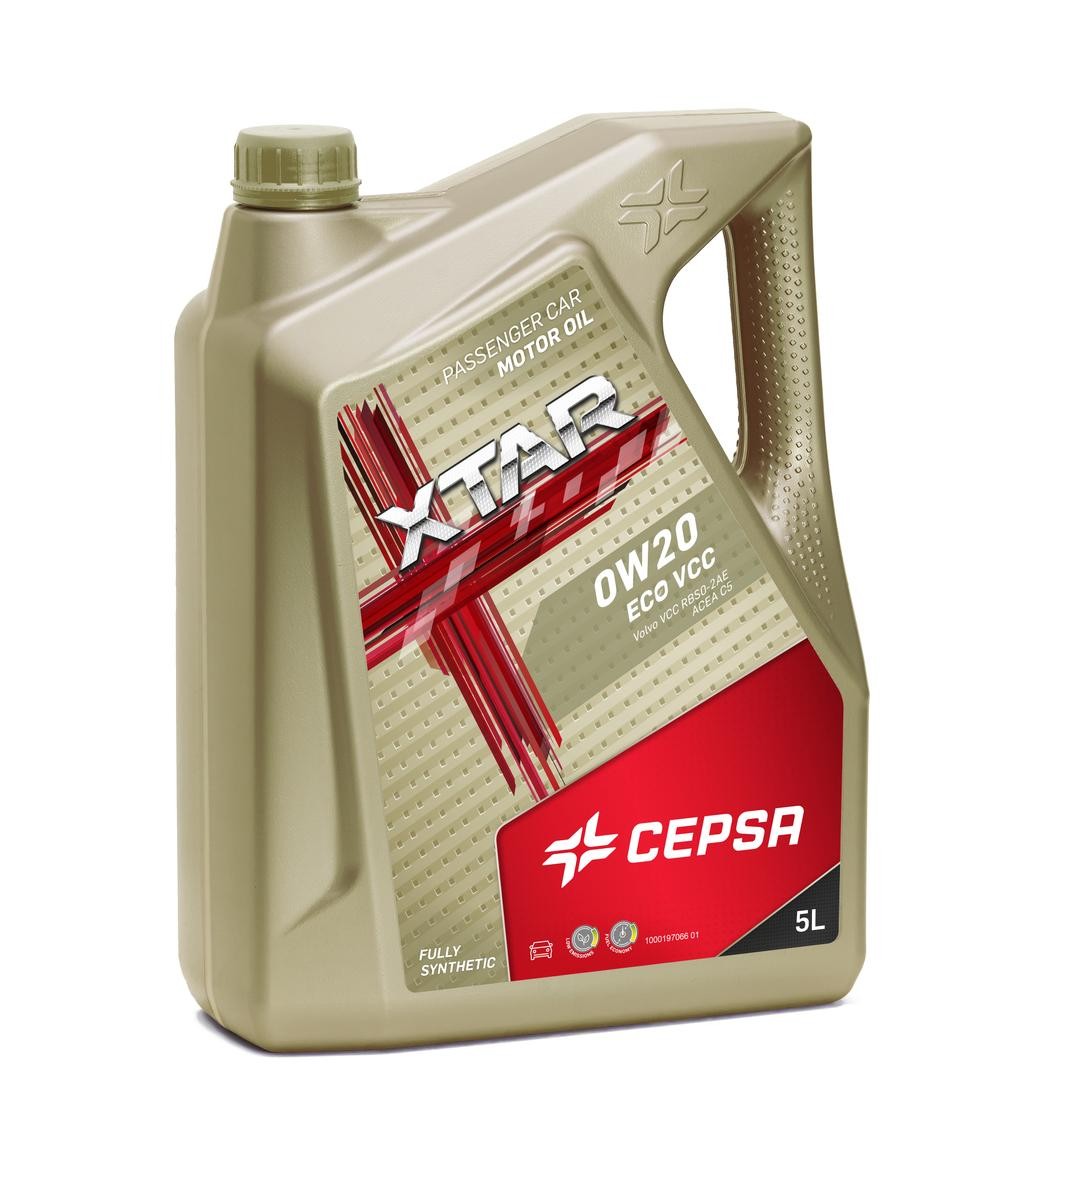 Engine oil CEPSA 0W-20, 5l, Synthetic, Full Synthetic Oil longlife 513993090